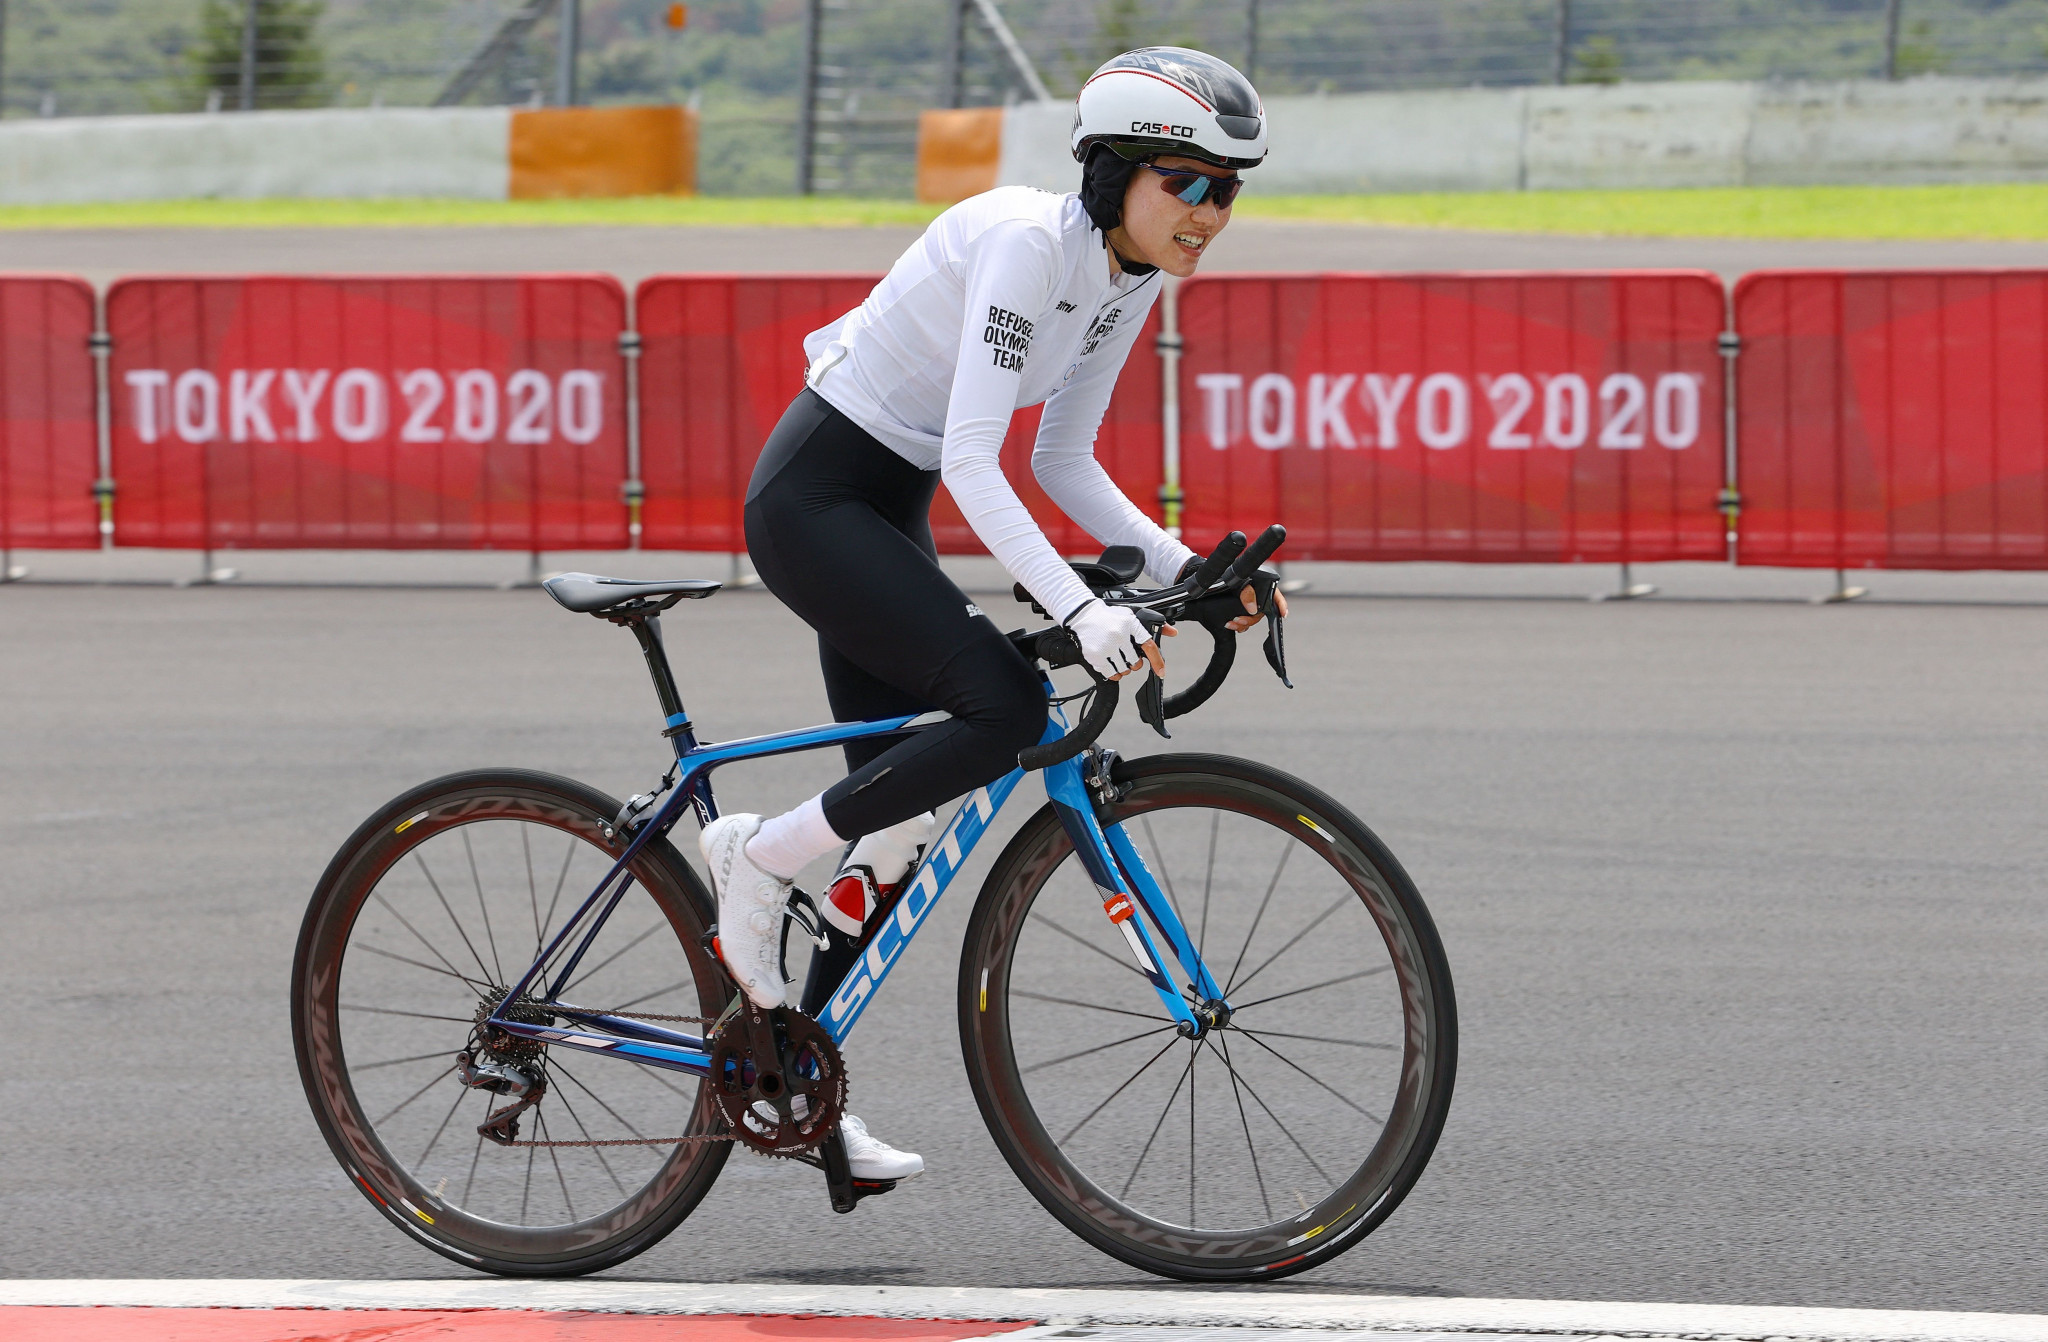 Aghan refugee cyclist Masomah Ali Zada participated at the Tokyo 2020 Olympics ©Getty Images